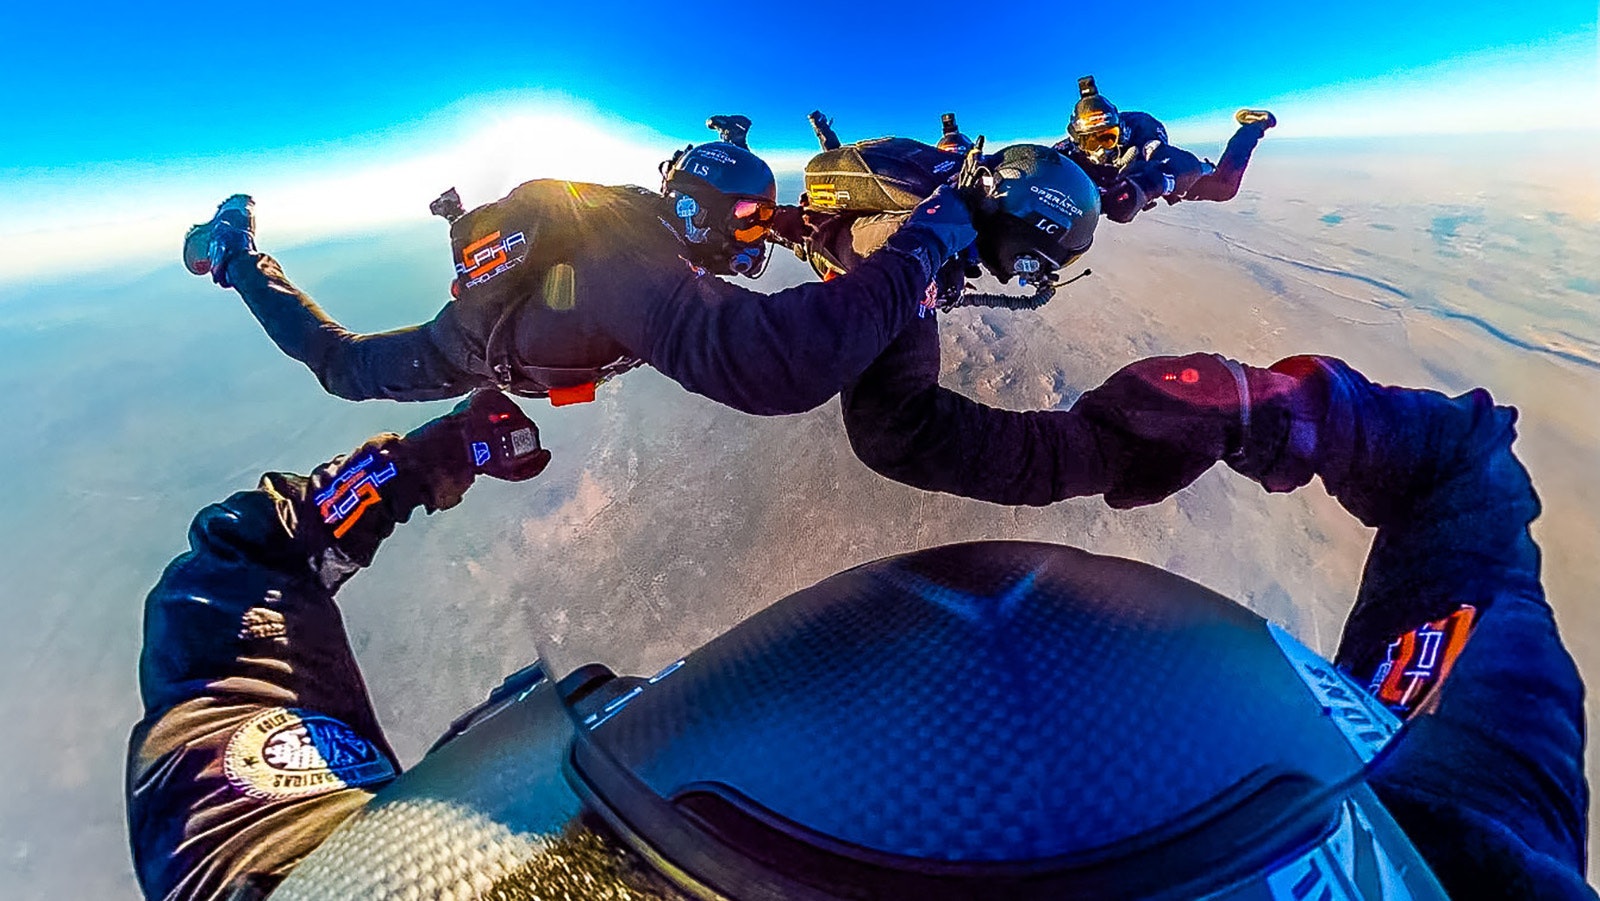 Skydivers in formation set a new world record jumping from more than 38,000 feet over New Mexico.